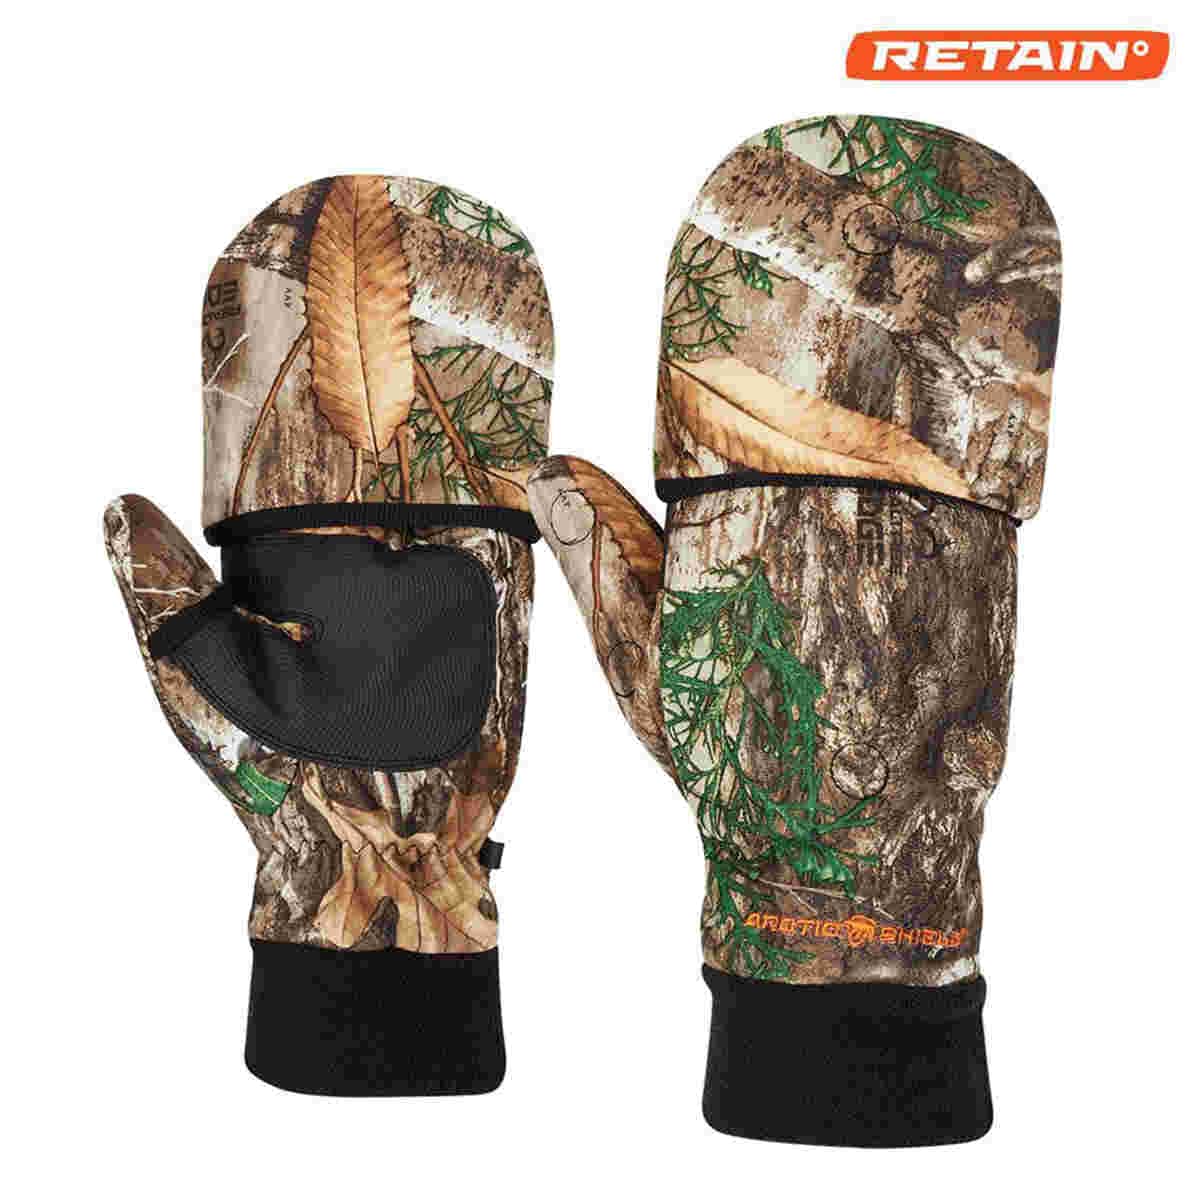 Arctic Shield Arctic Shield System Gloves with Tech Fingers Realtree Edge / Medium